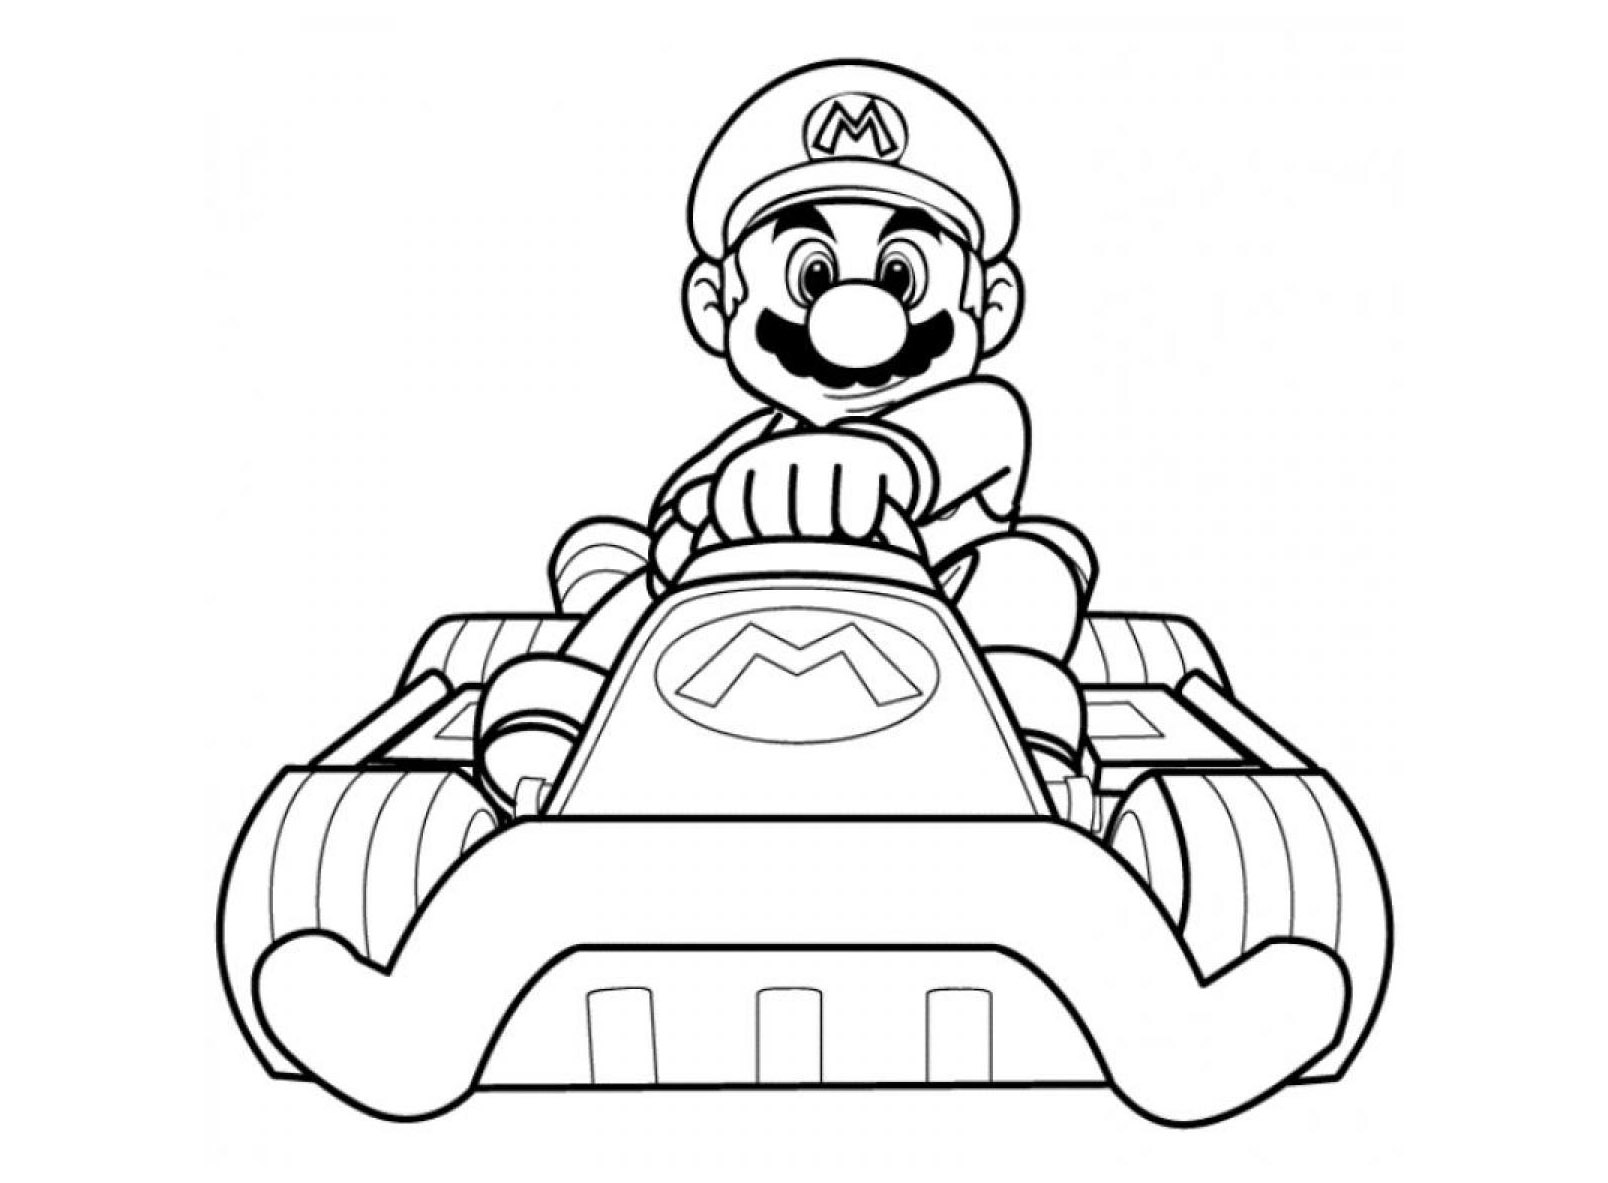 Mario Kart coloring pages to download Mario Kart Kids Coloring Pages